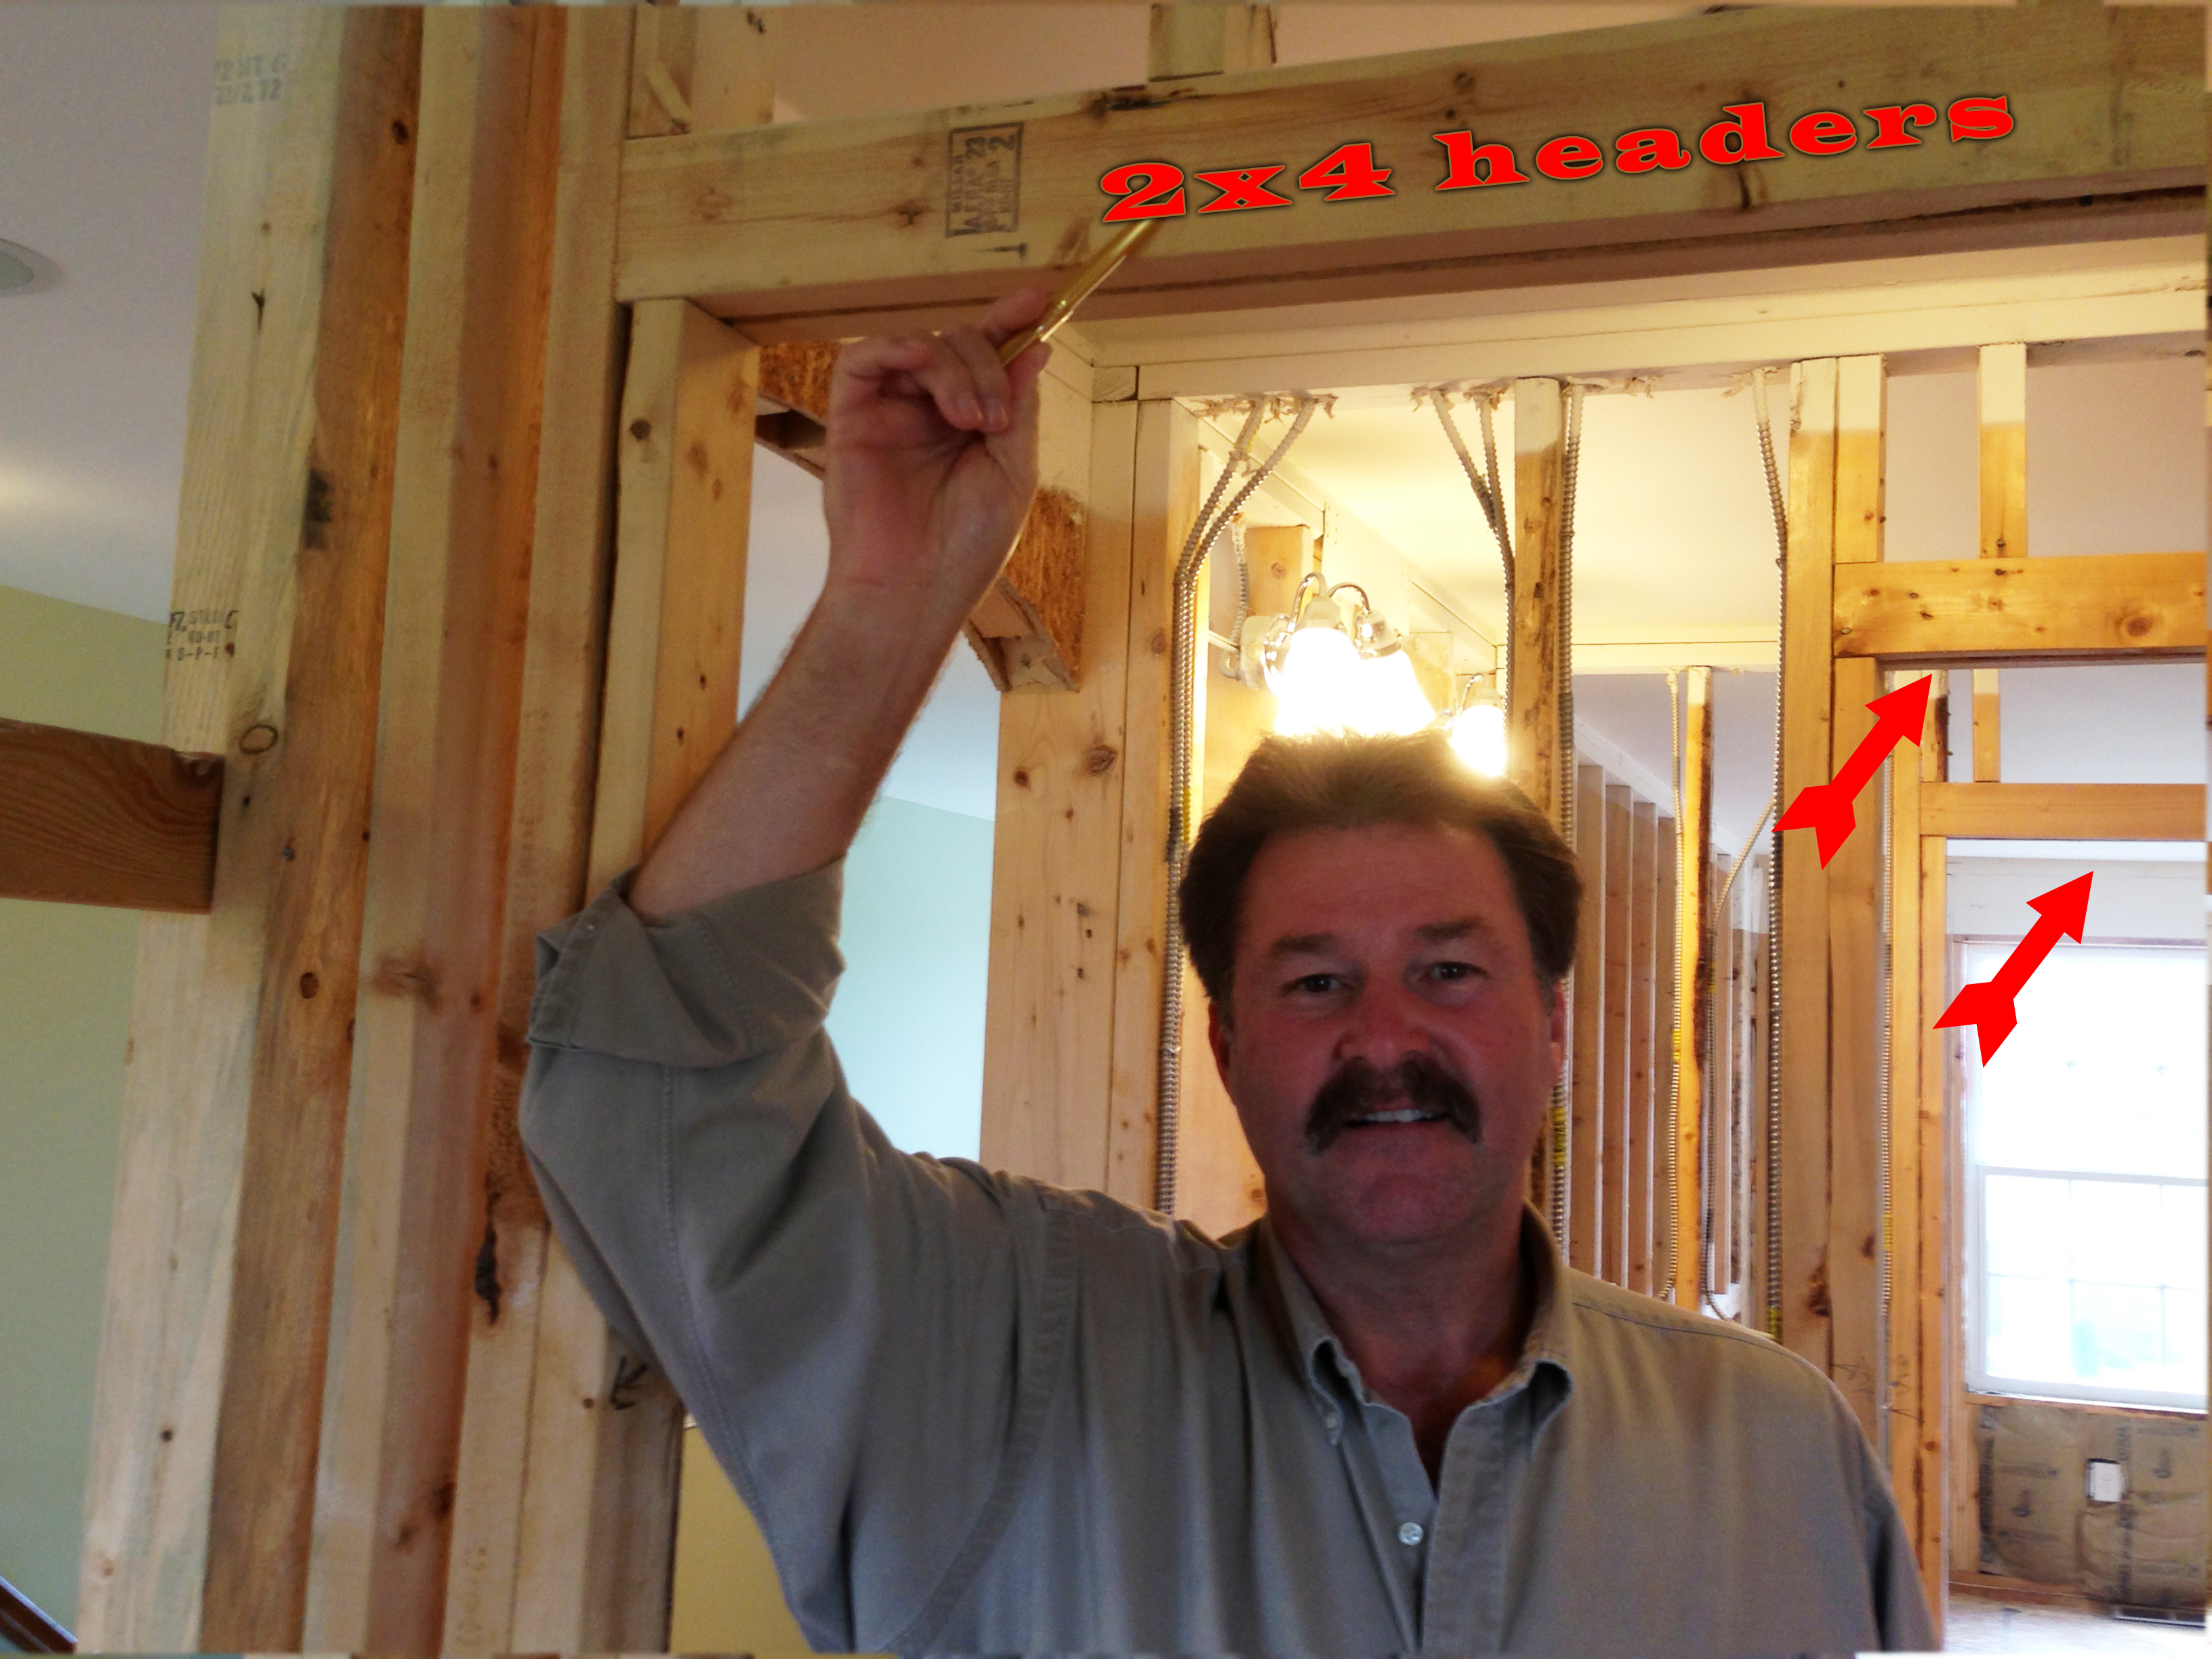 2x4 headers above openings are typical on prefabricated homes